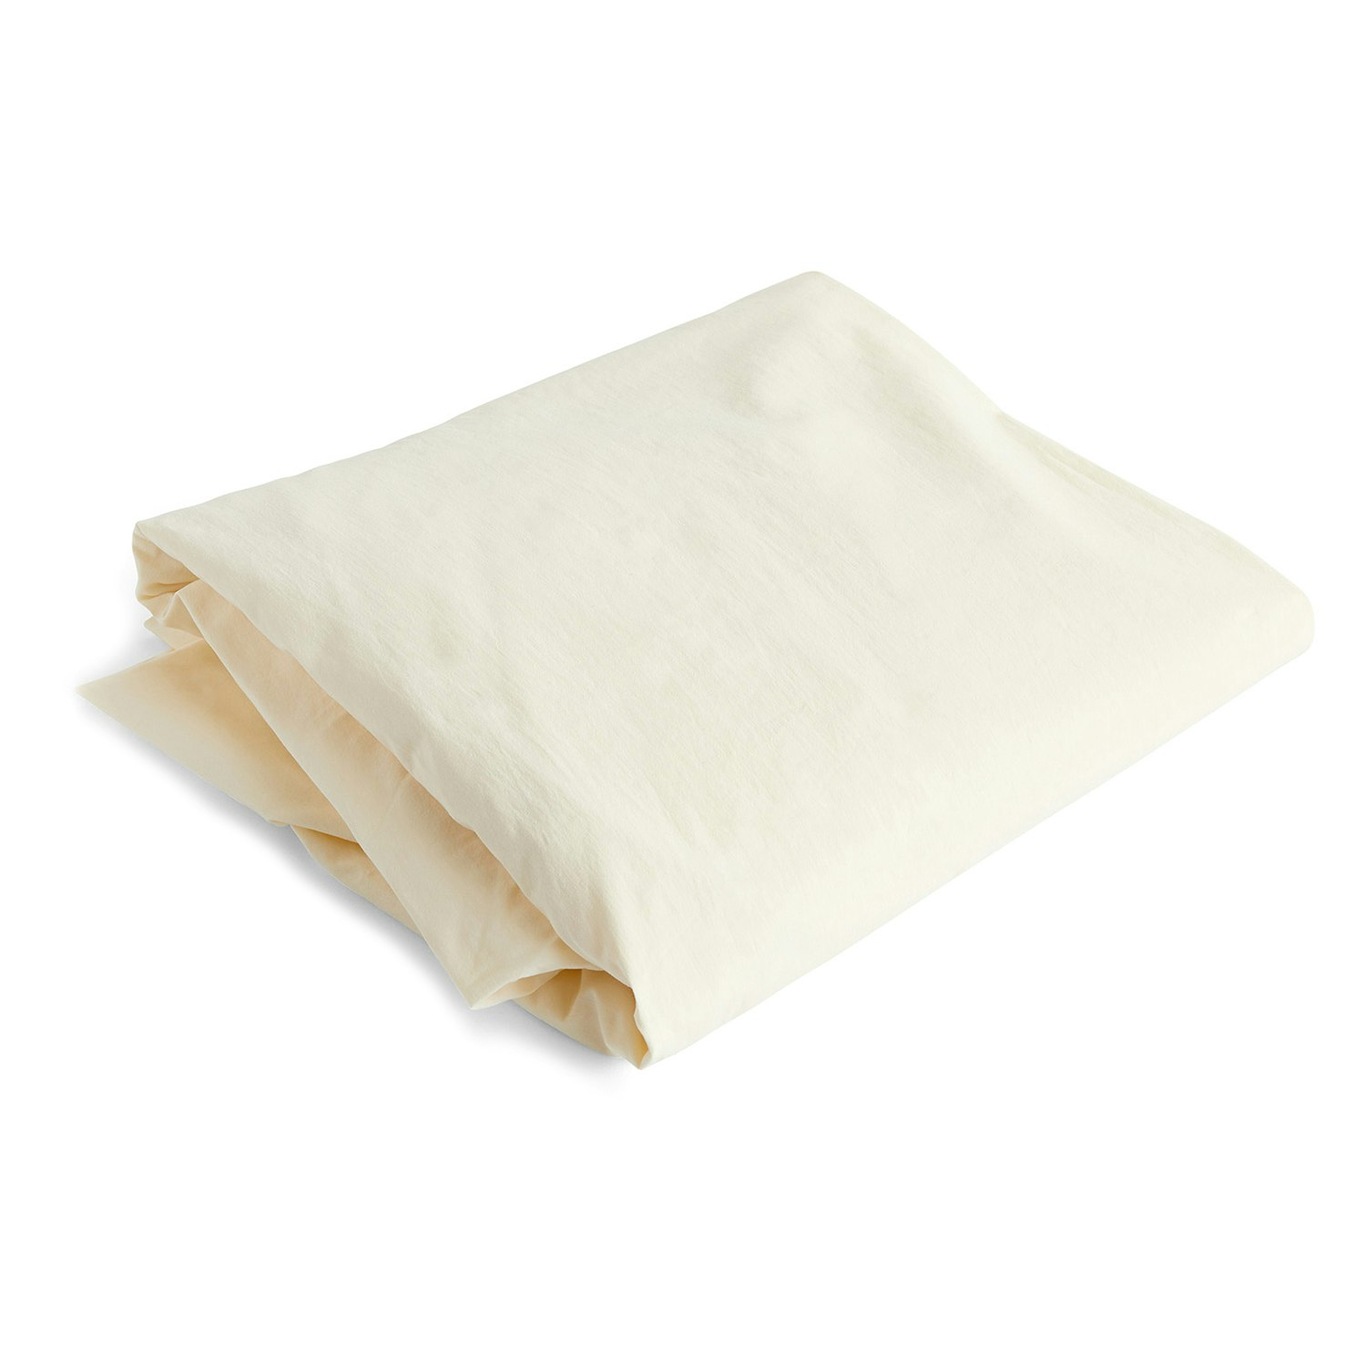 Standard Fitted Sheet 90x200 cm, Ivory